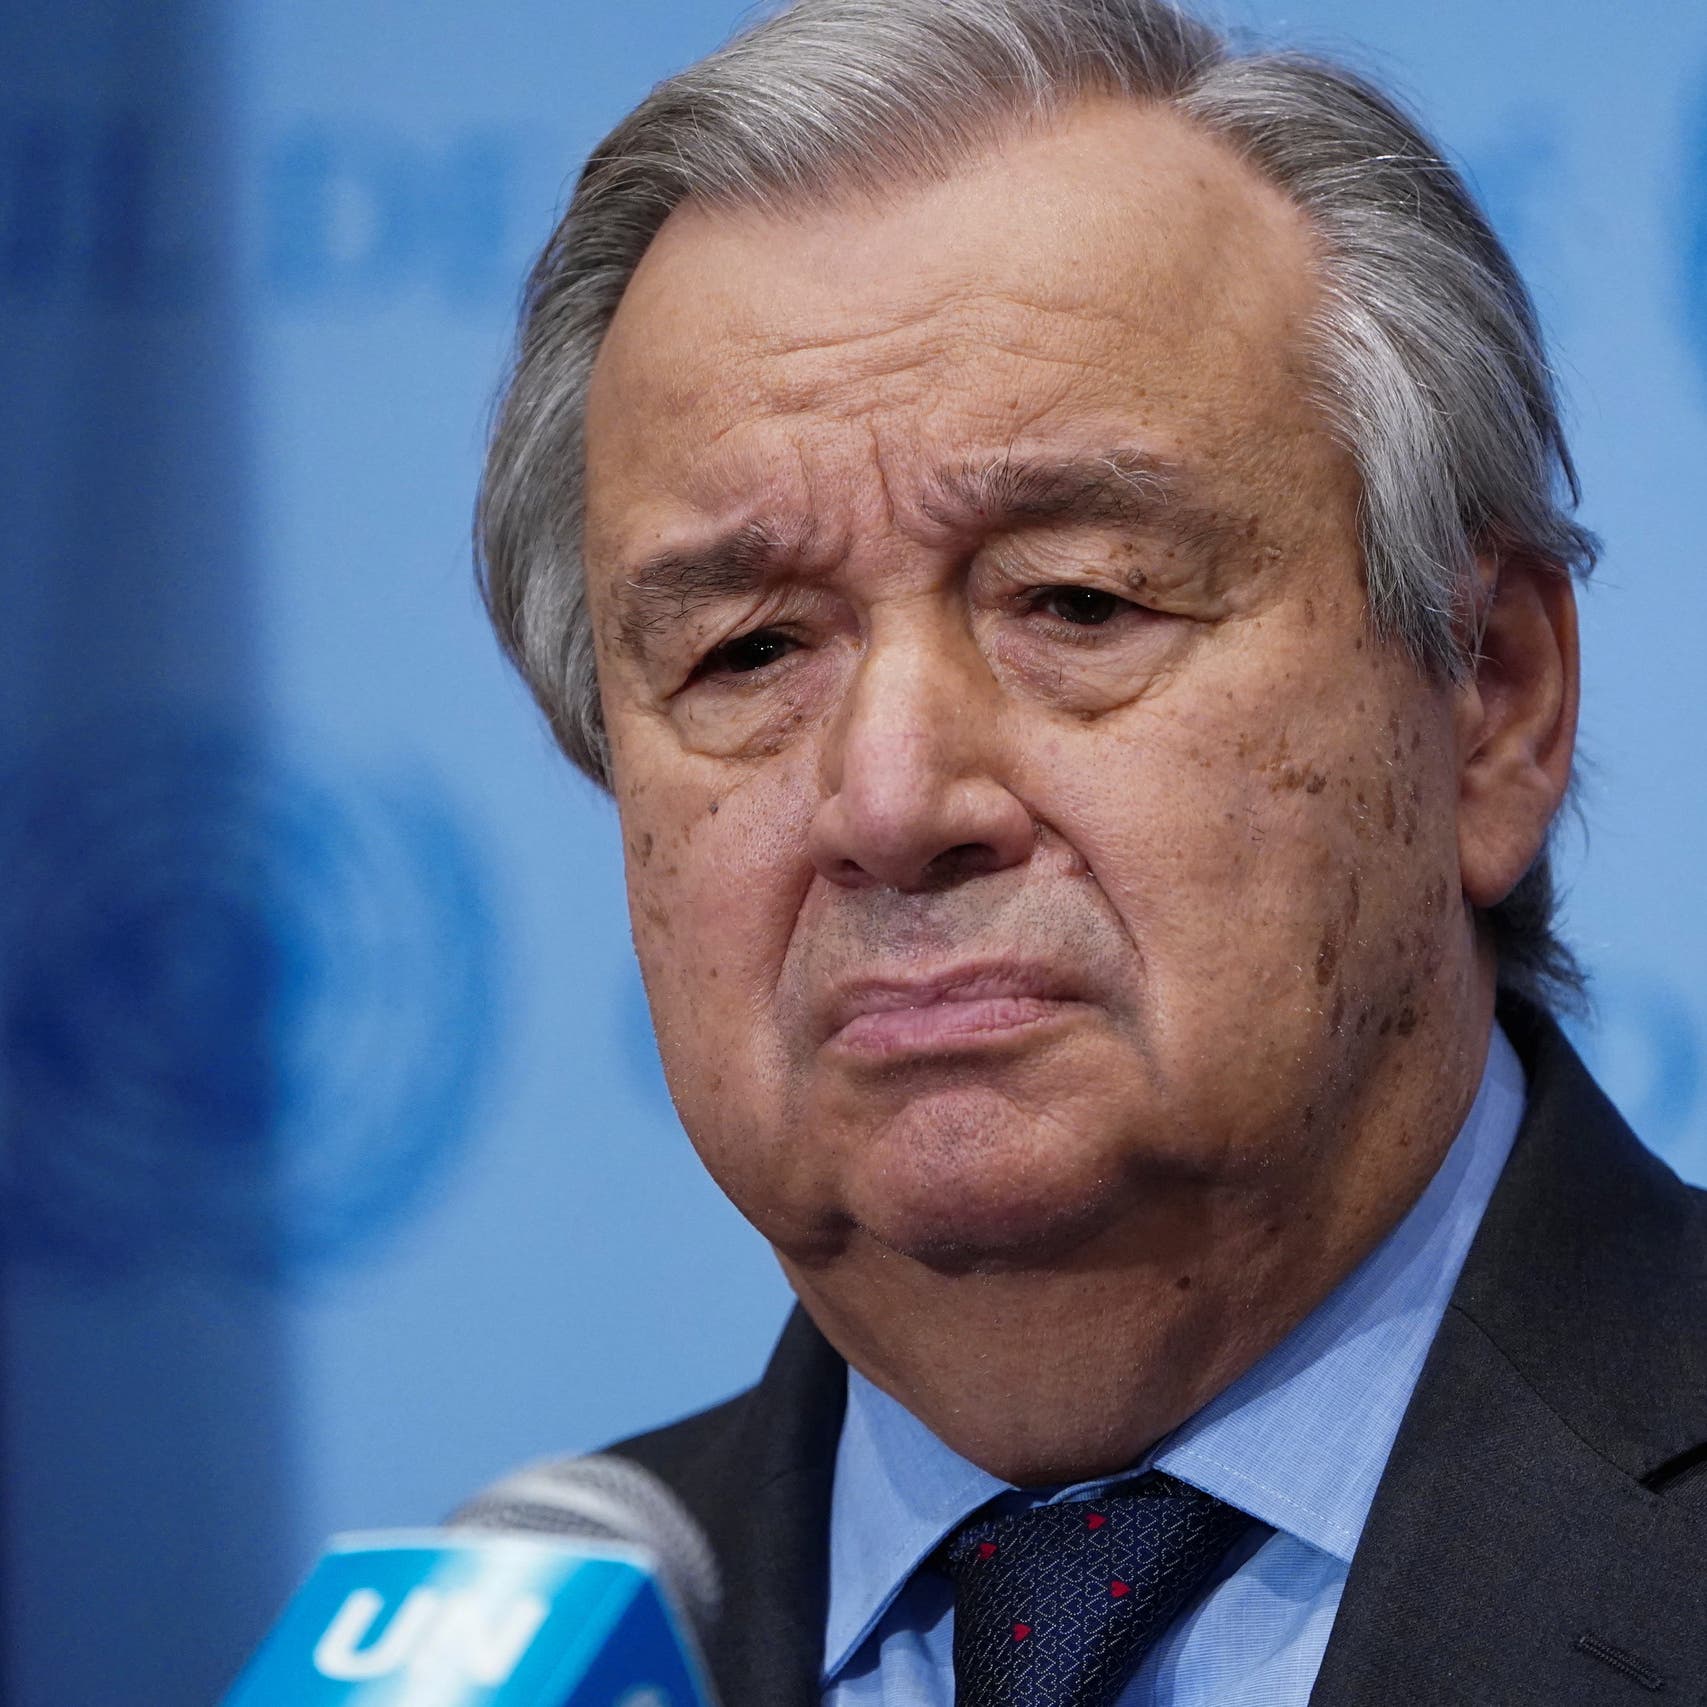 UN chief urges Putin to stop conflict for ‘humanity’s’ sake